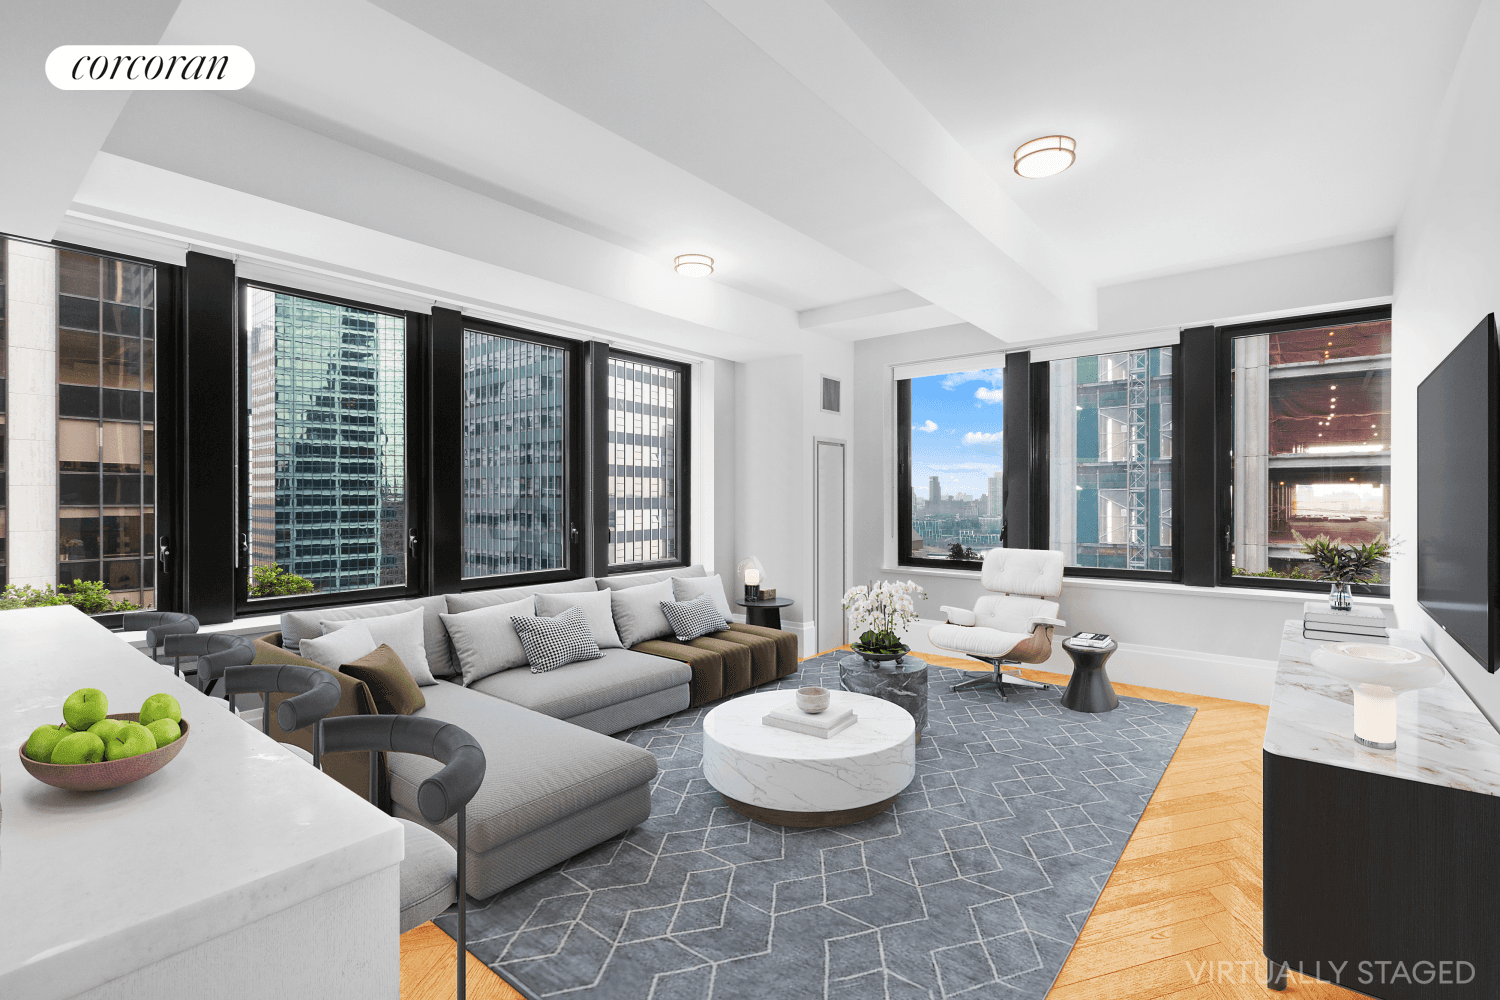 23A, A rare residence occupying the entire 23rd full floor in an Art Deco luxury doorman condominium with 2 private terraces.